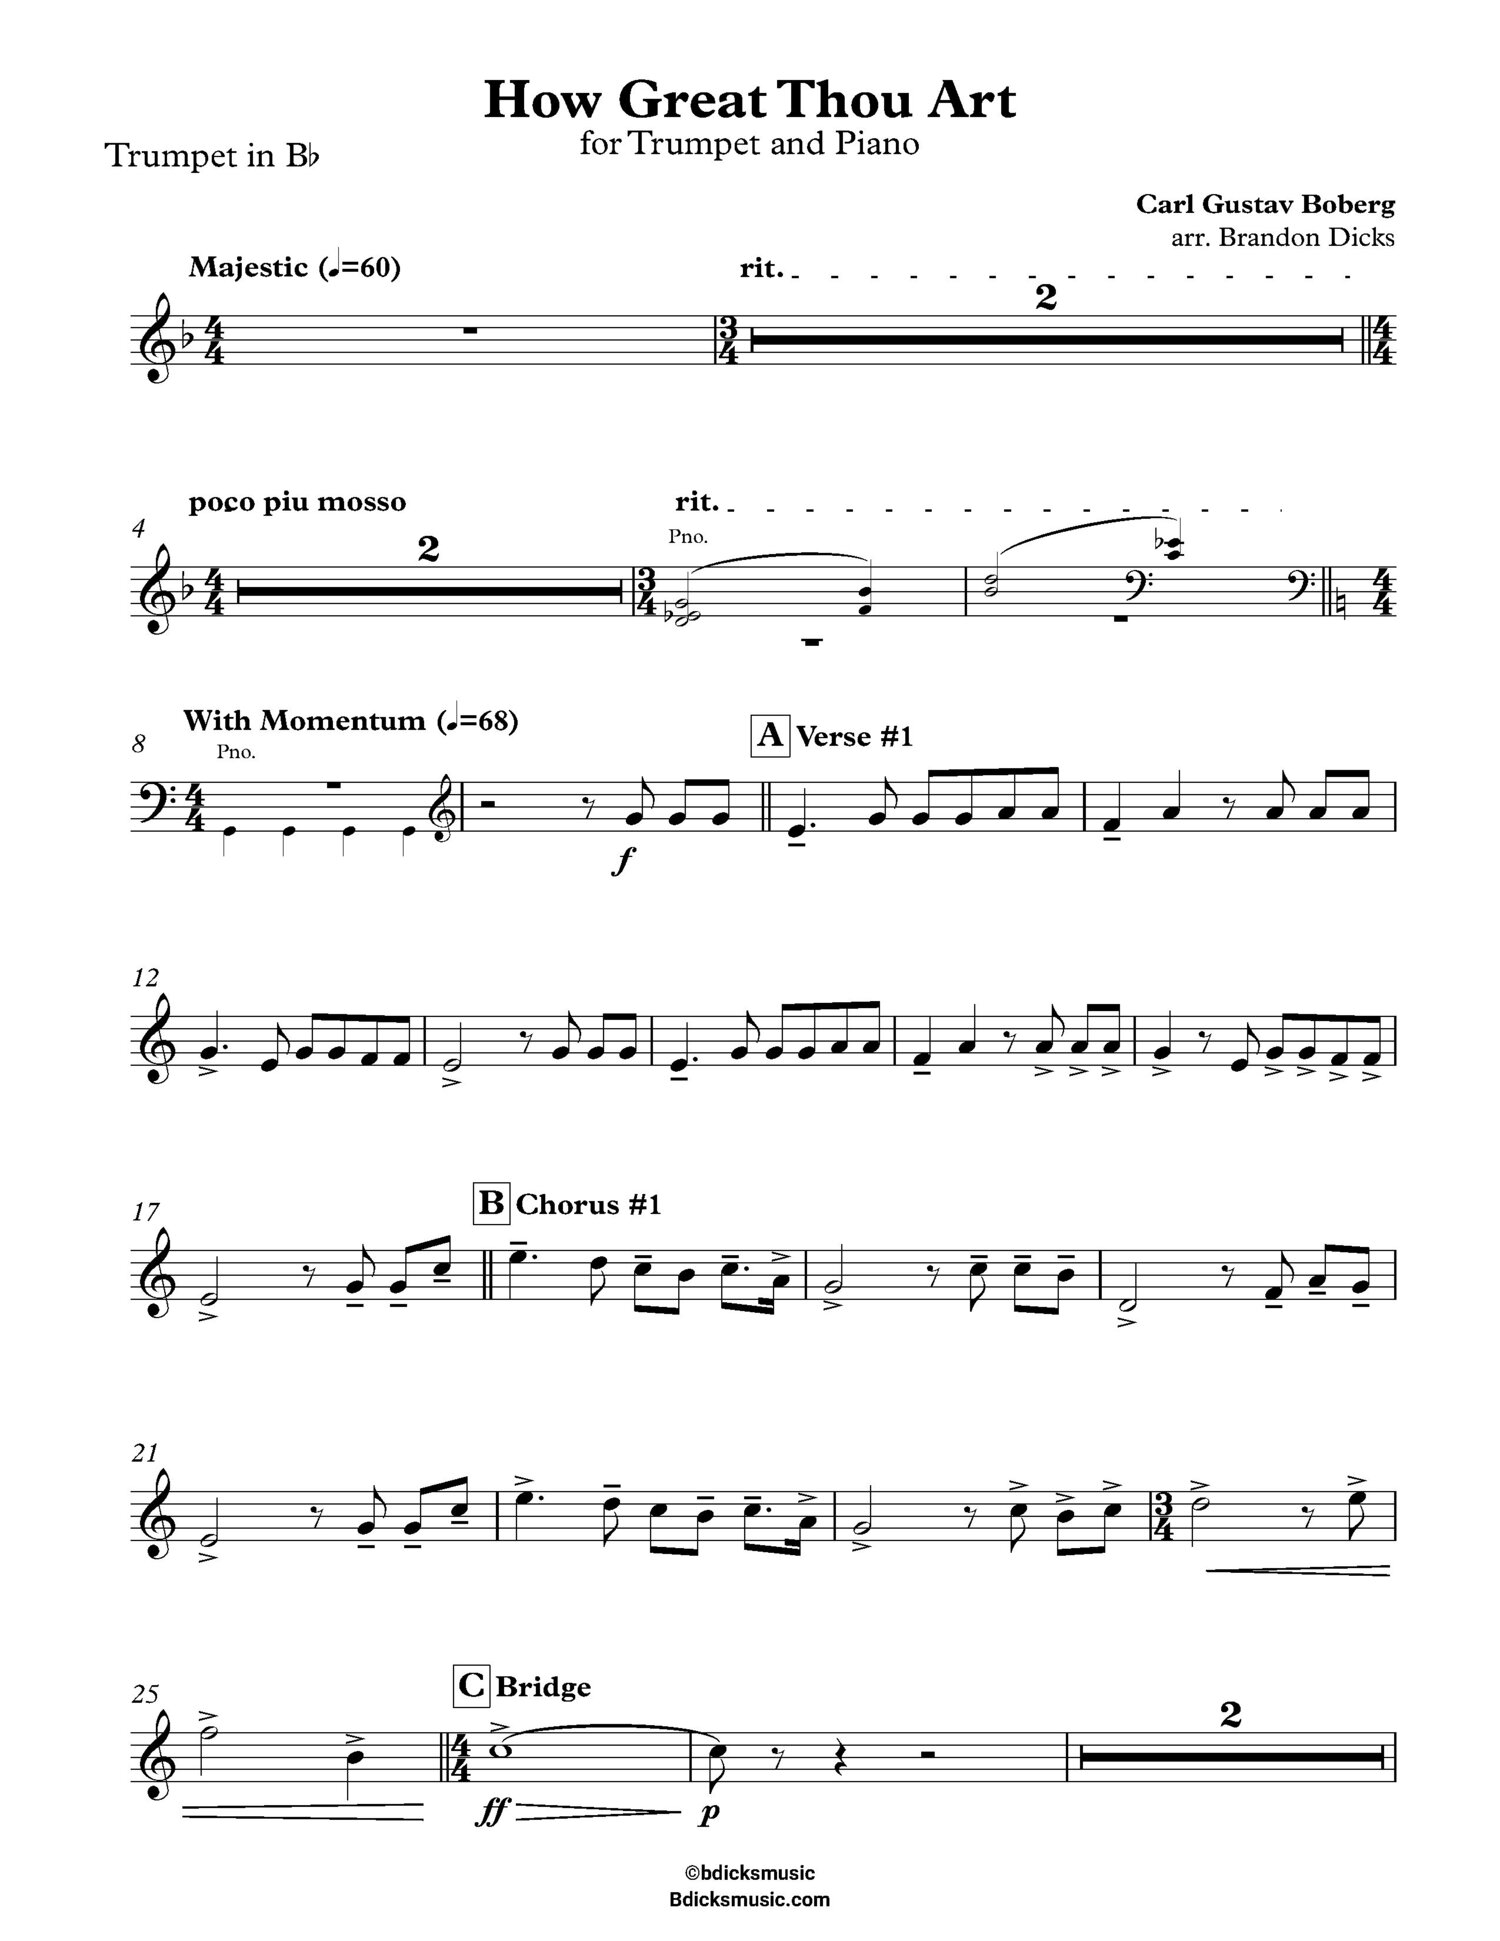 How Great Thou Art  for Trumpet and Piano — BDicksmusic Sheet Music